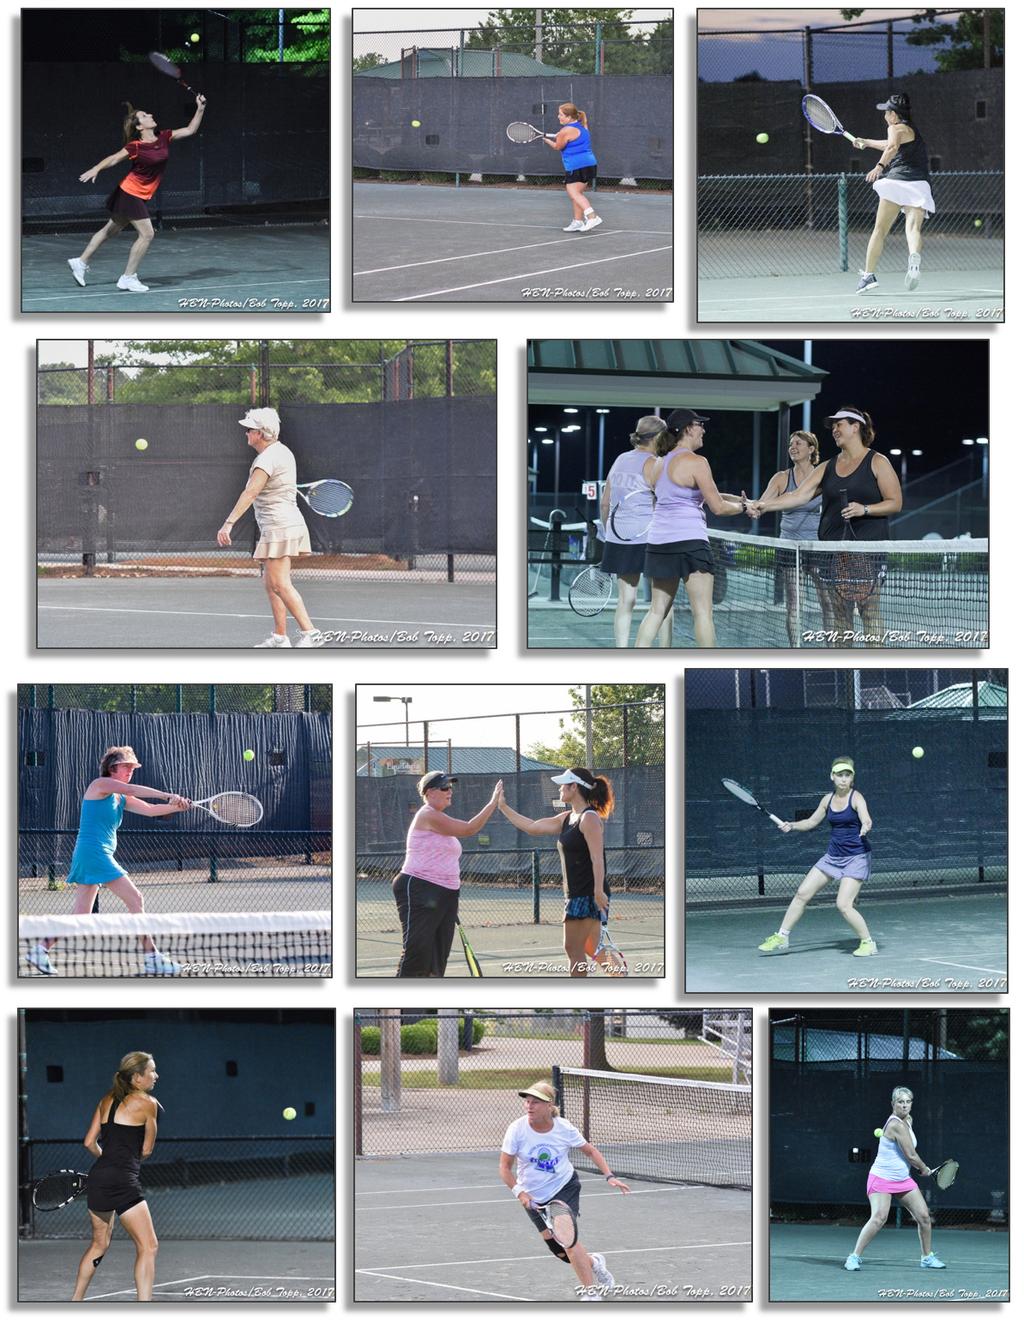 A BIG thank you to Bob Topp for sharing these amazing photos of our Spring Tournament.